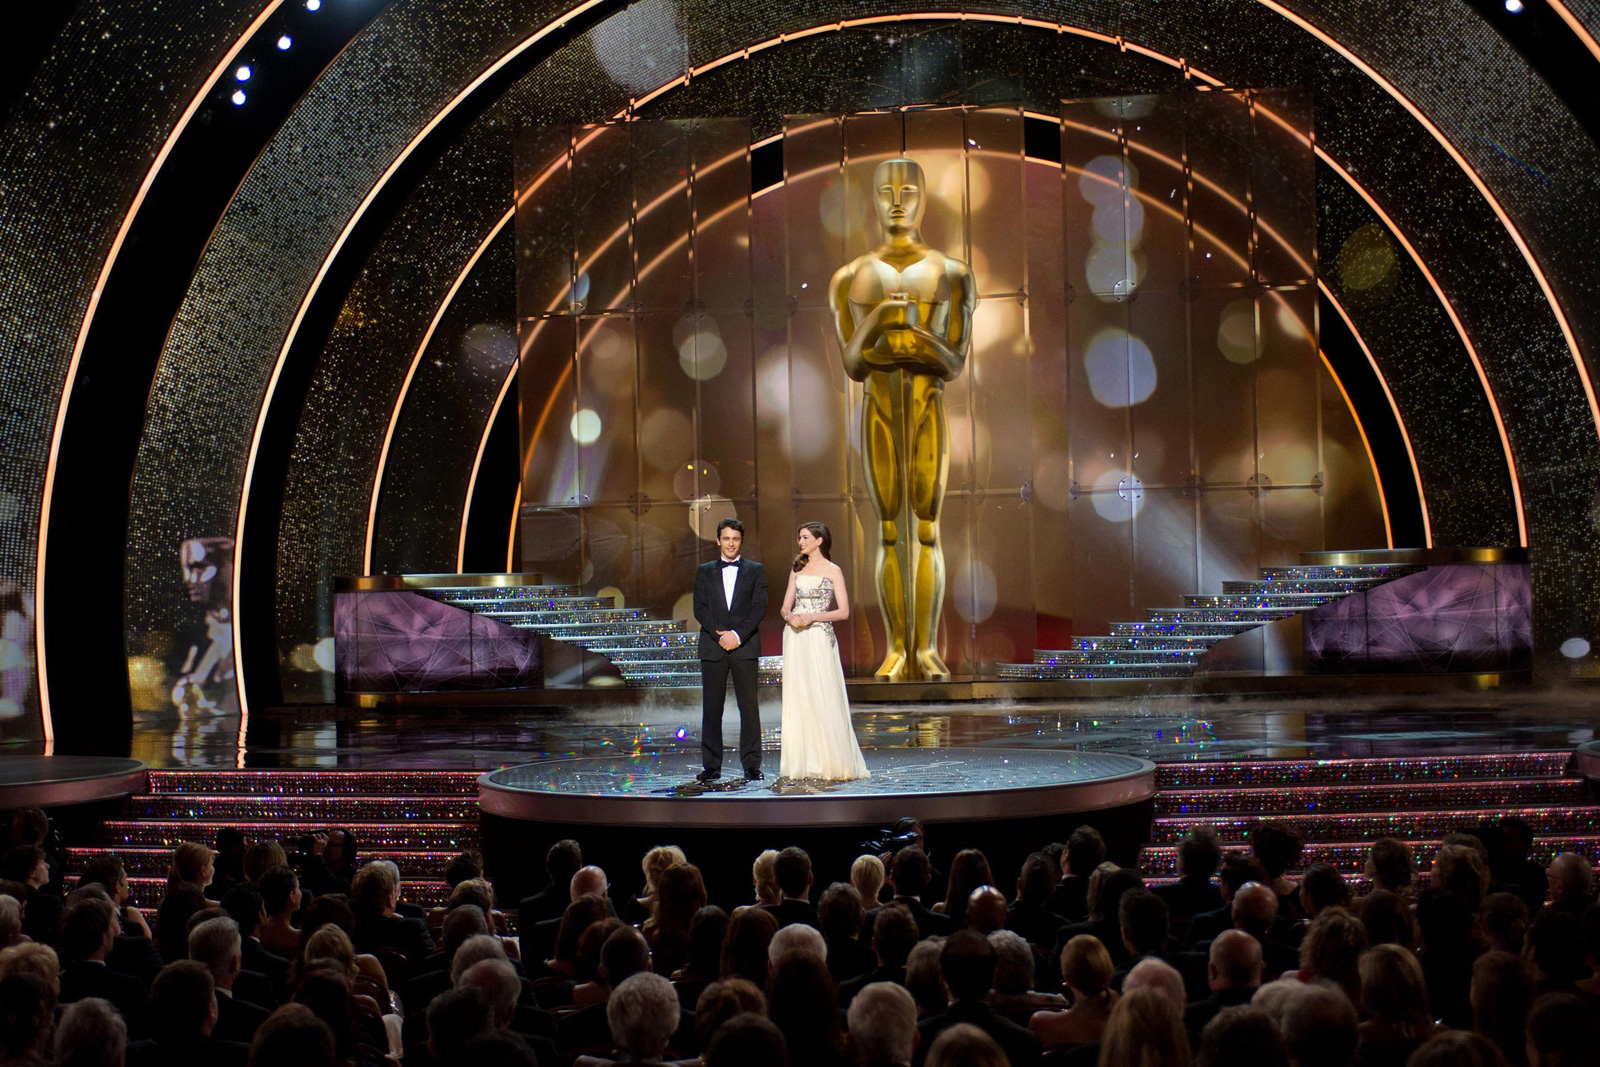 Swarovski Shined Center Stage at the 83rd Academy Awards